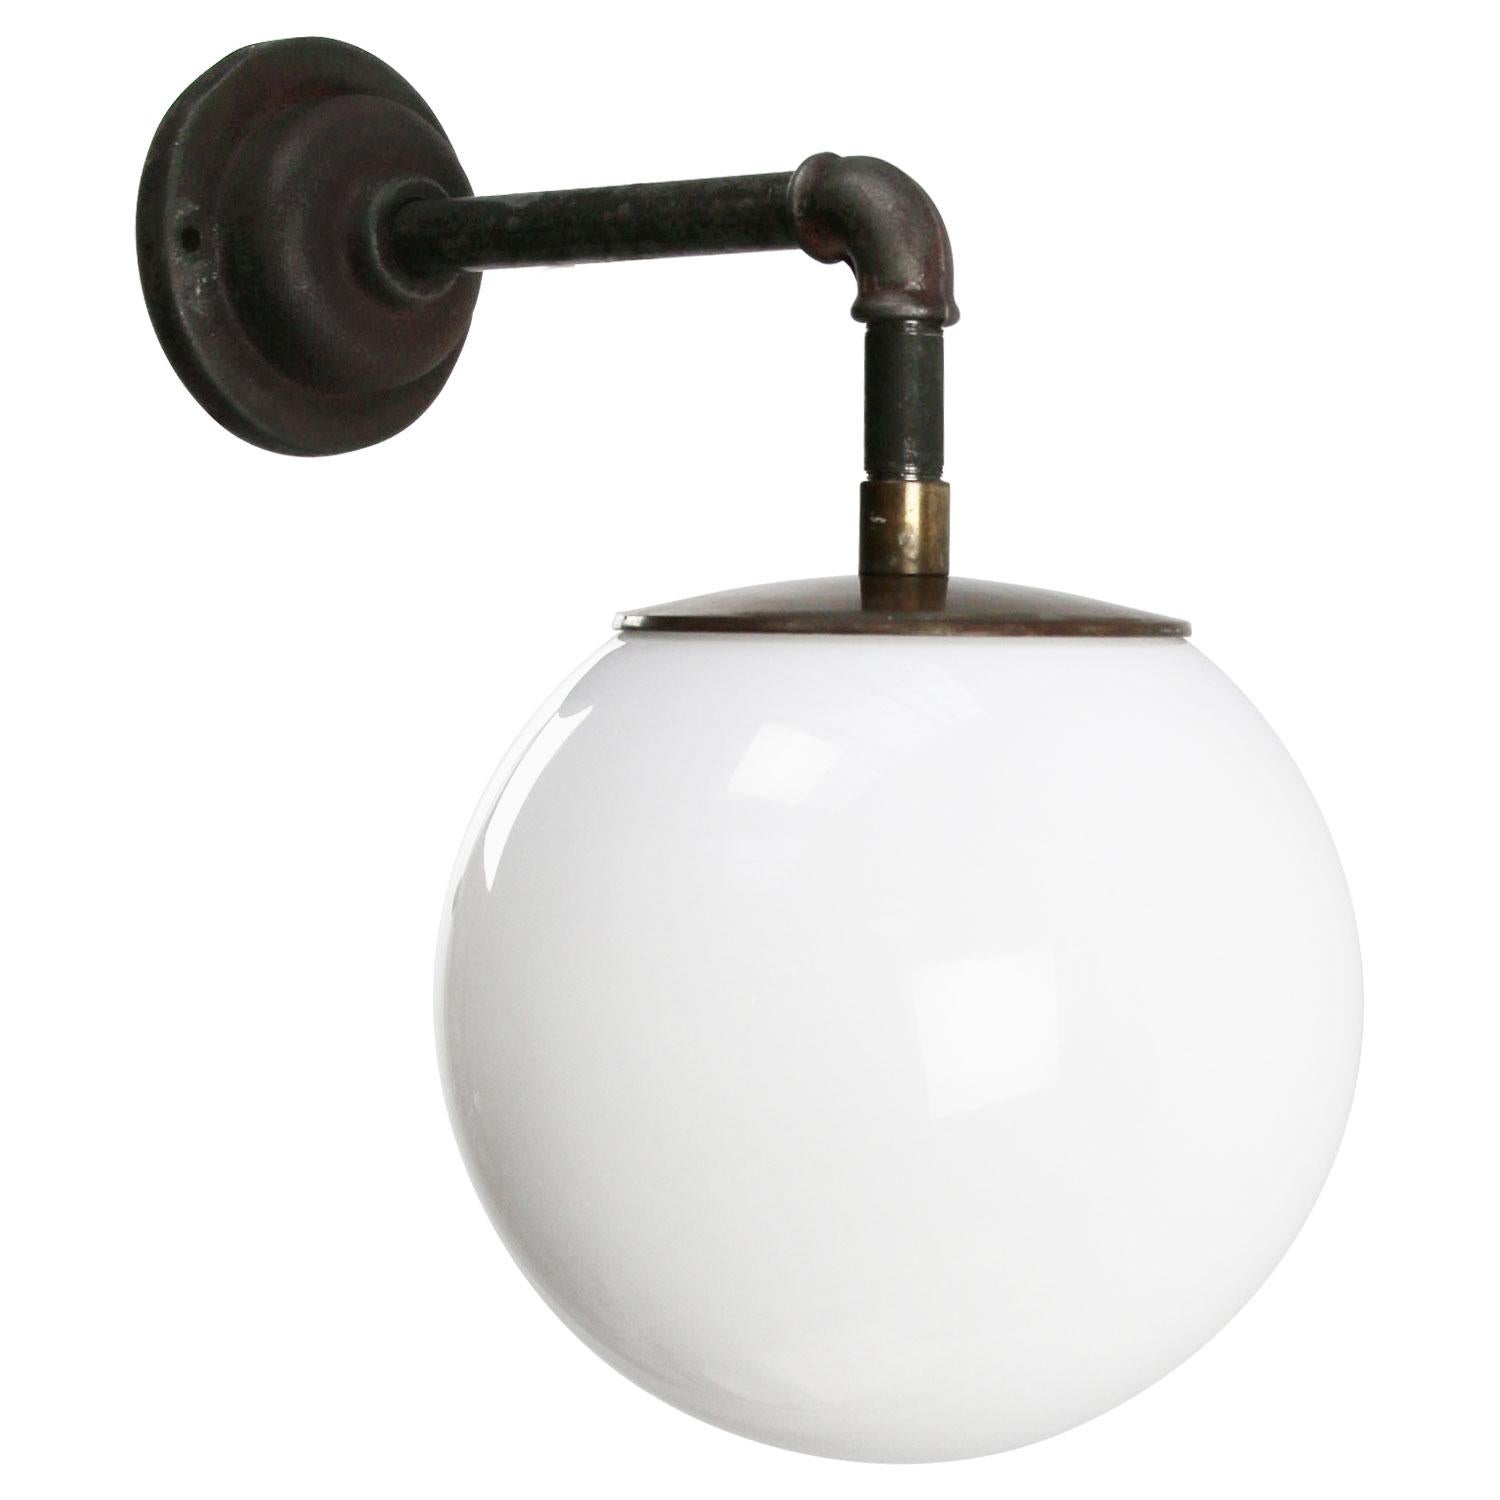 Opaline glass industrial wall light.
Brass top.

Measures: Diameter cast iron wall piece 10 cm. 2 holes to secure.

Weight: 4.80 kg / 10.6 lb

Priced per individual item. All lamps have been made suitable by international standards for